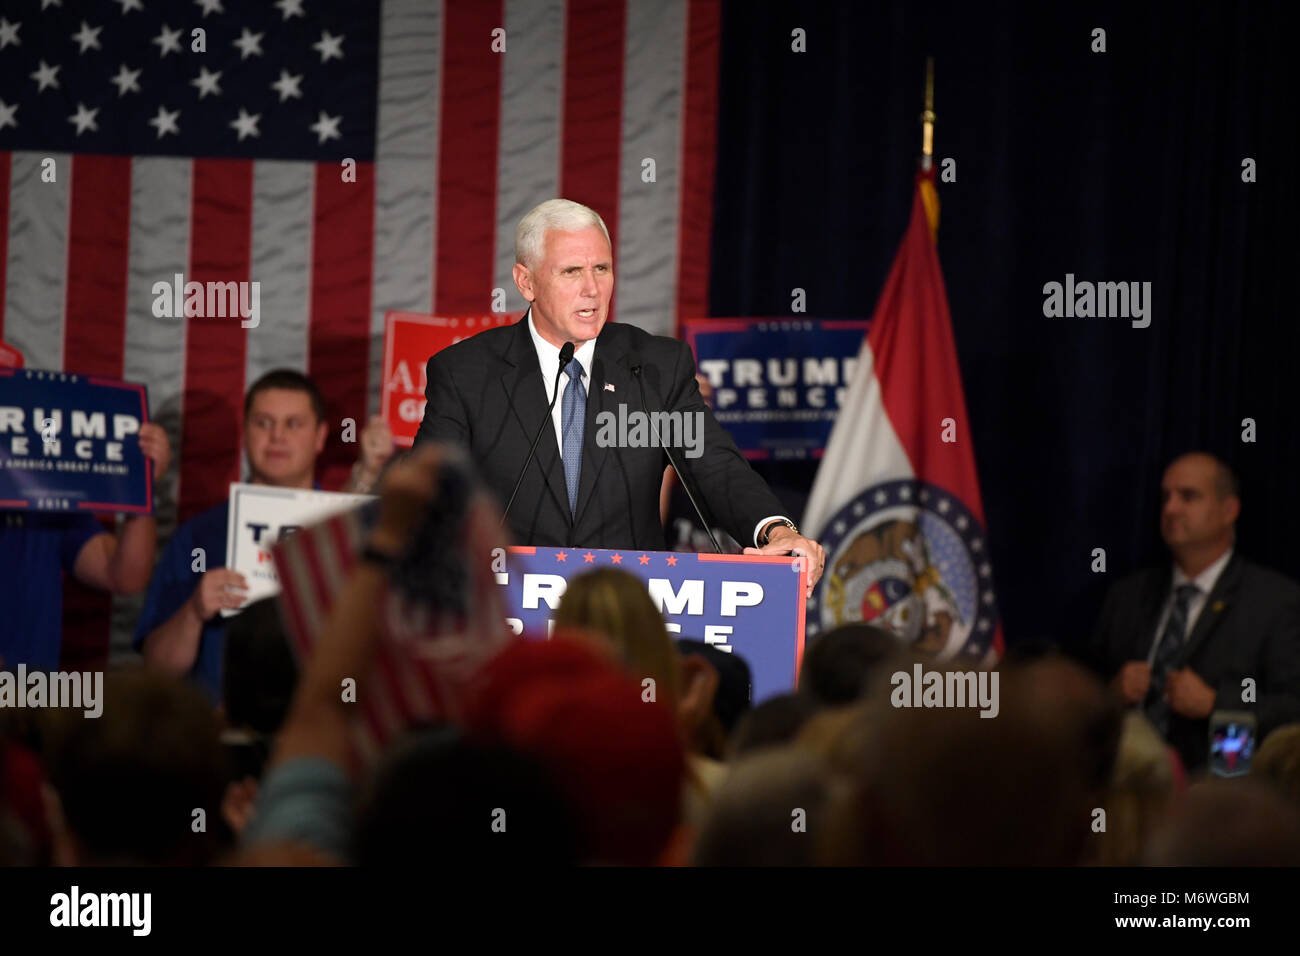 Chesterfield, MO, USA – September 06, 2016: Republican vice presidential candidate, Indiana Governor Mike Pence speaks to supporters at a rally in Che Stock Photo